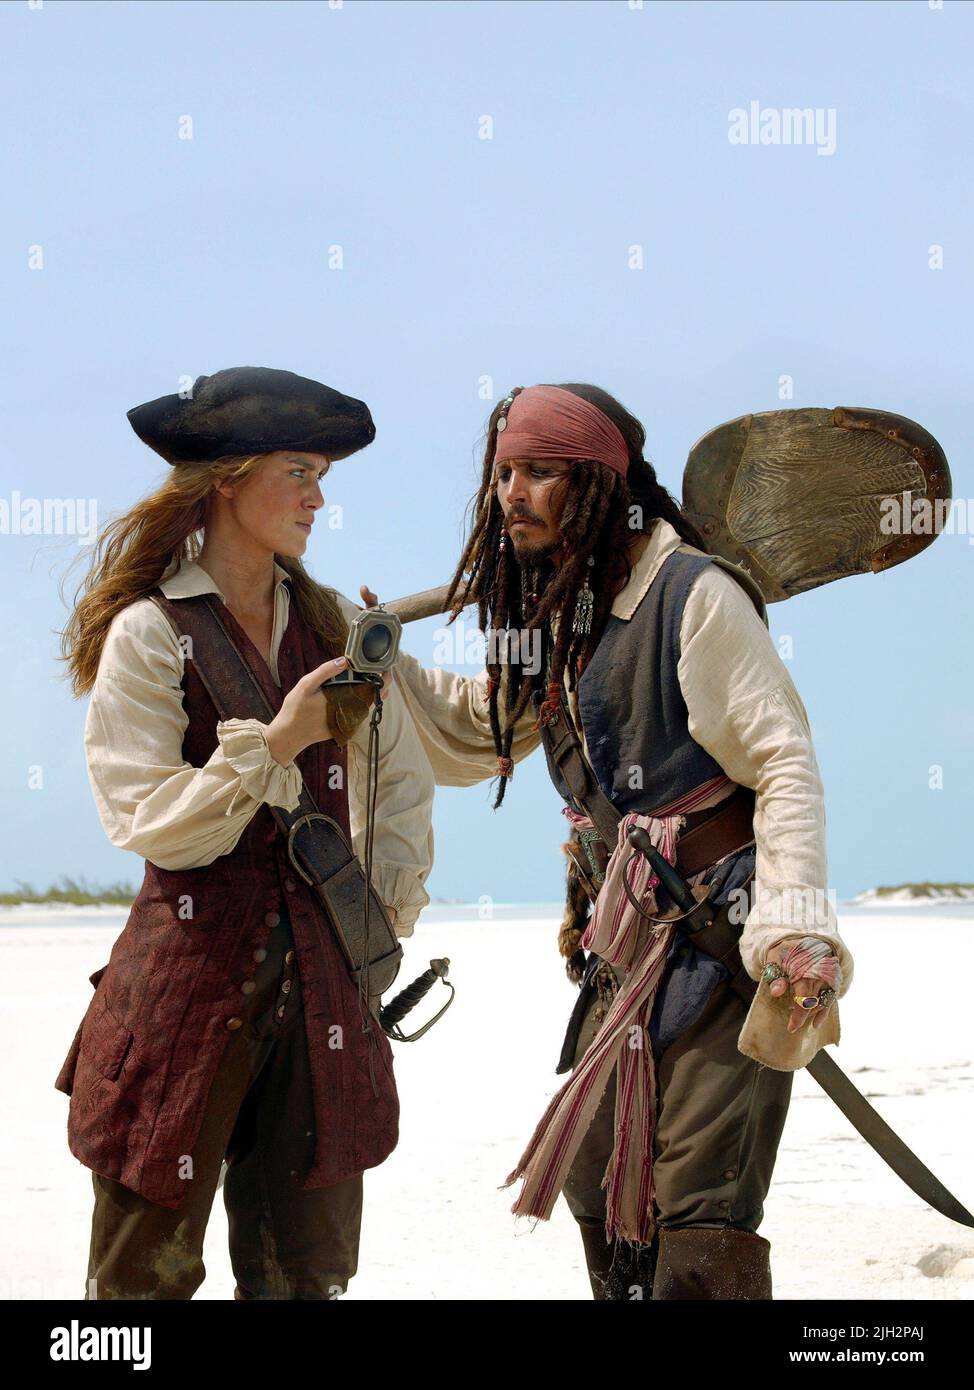 KNIGHTLEY,DEPP, PIRATES OF THE CARIBBEAN: DEAD MAN'S CHEST, 2006 Stock Photo